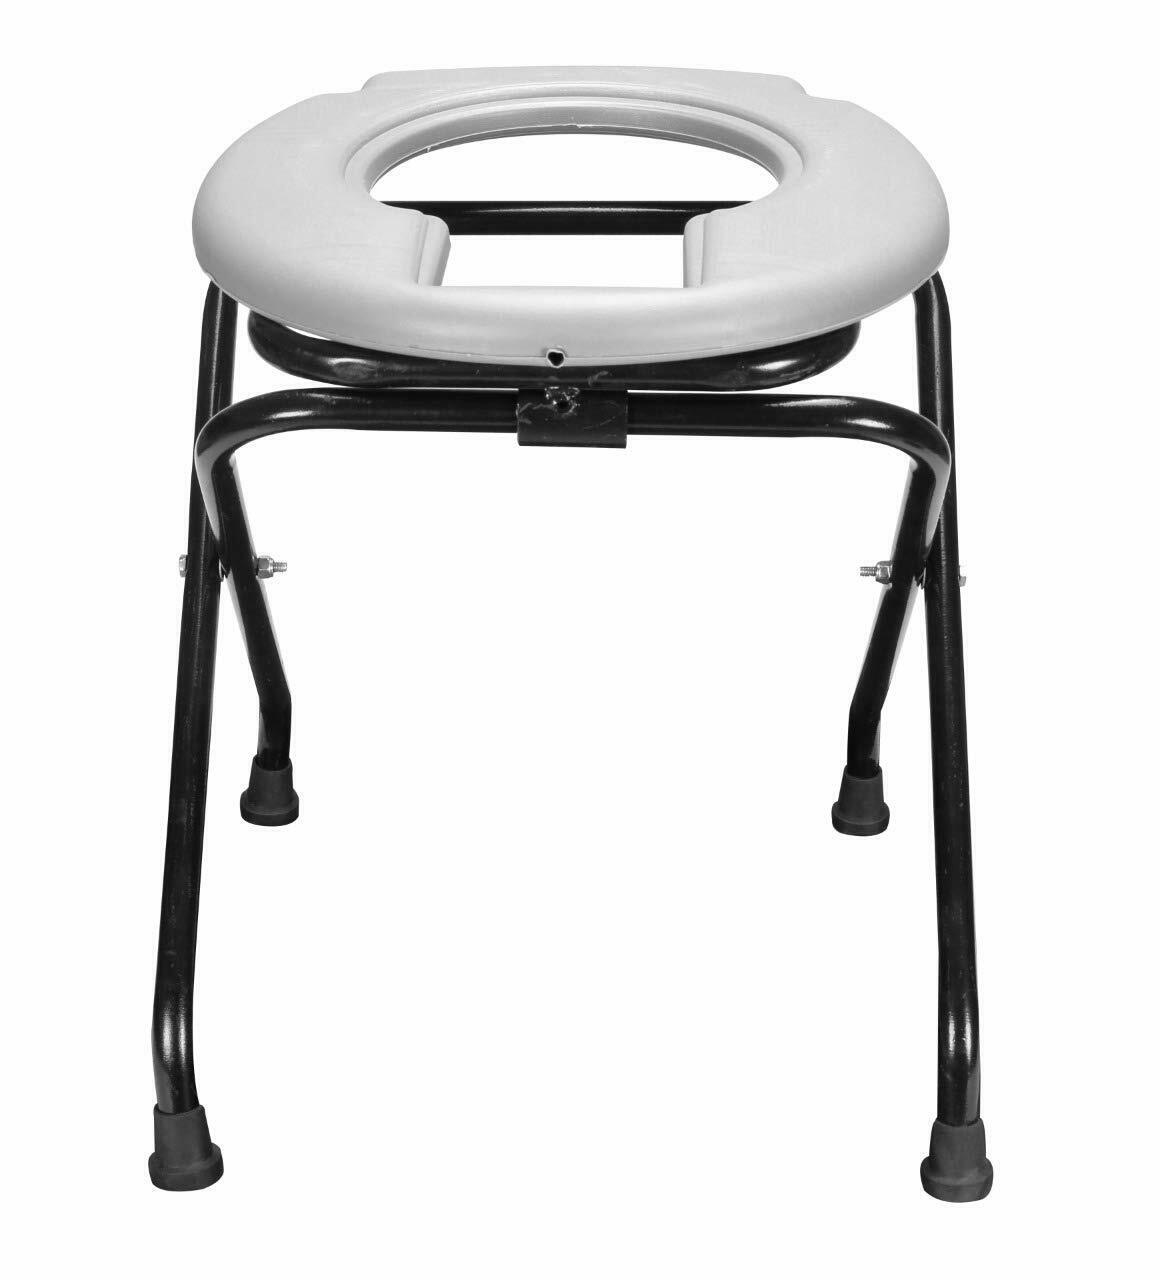 Folding Stainless Steel Mobile Commode Chair with Anti-Skid Toilet Seat (Grey)